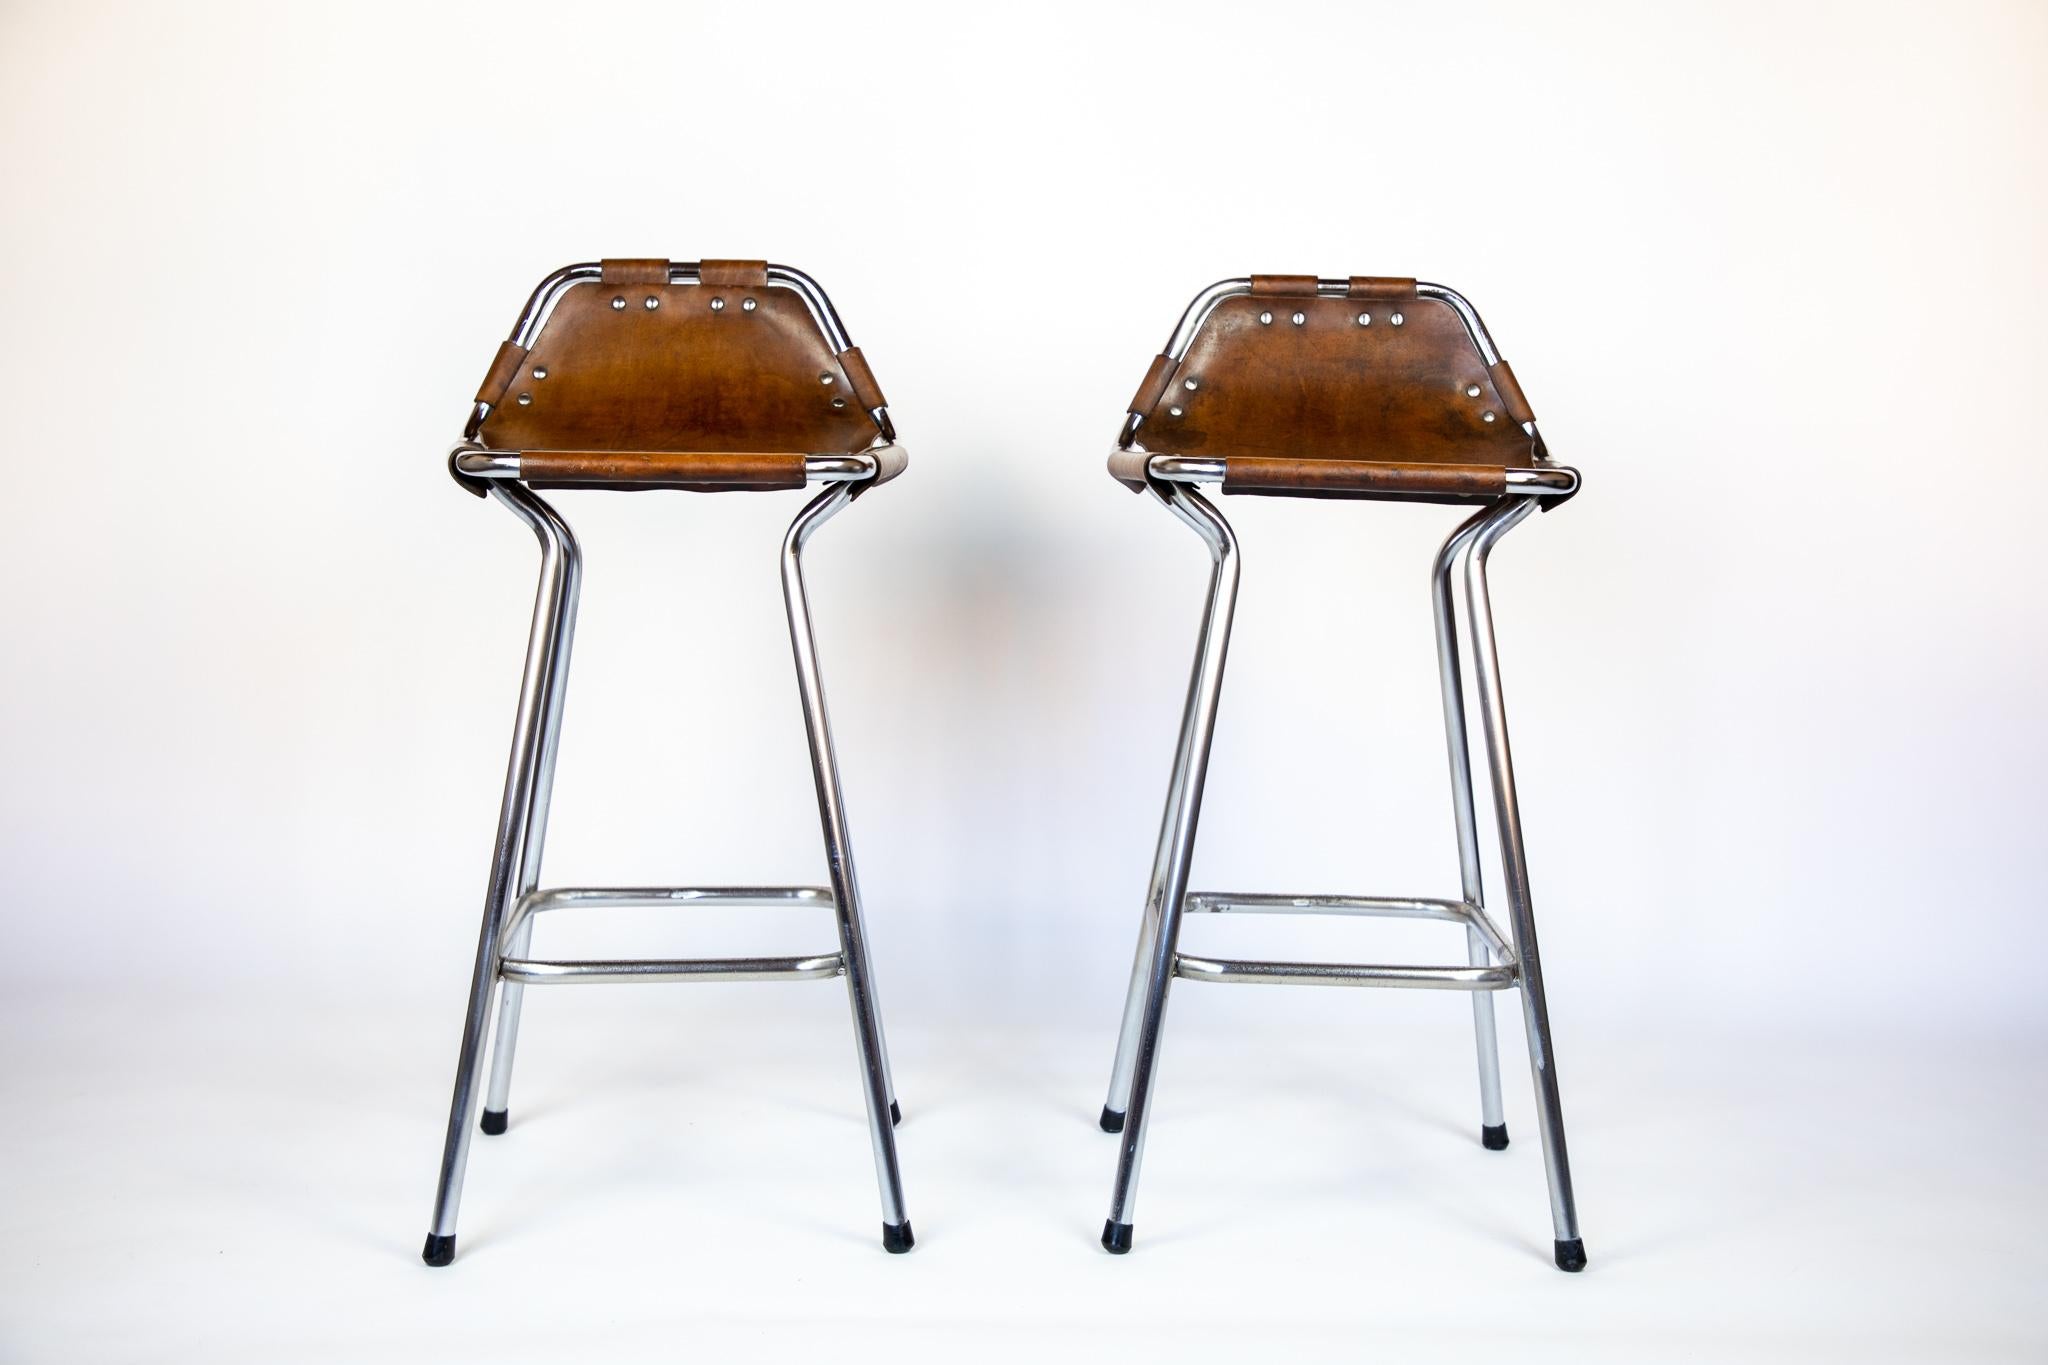 French mid-century saddle leather, brown, chrome bar stools, Perriand, 1960s.

Stunning set of 2 French Mid-Century Modern bar stools designed by the famous Designer Charlotte Perriand for the ski resort „Les Arcs“ in France 1960. The stools have